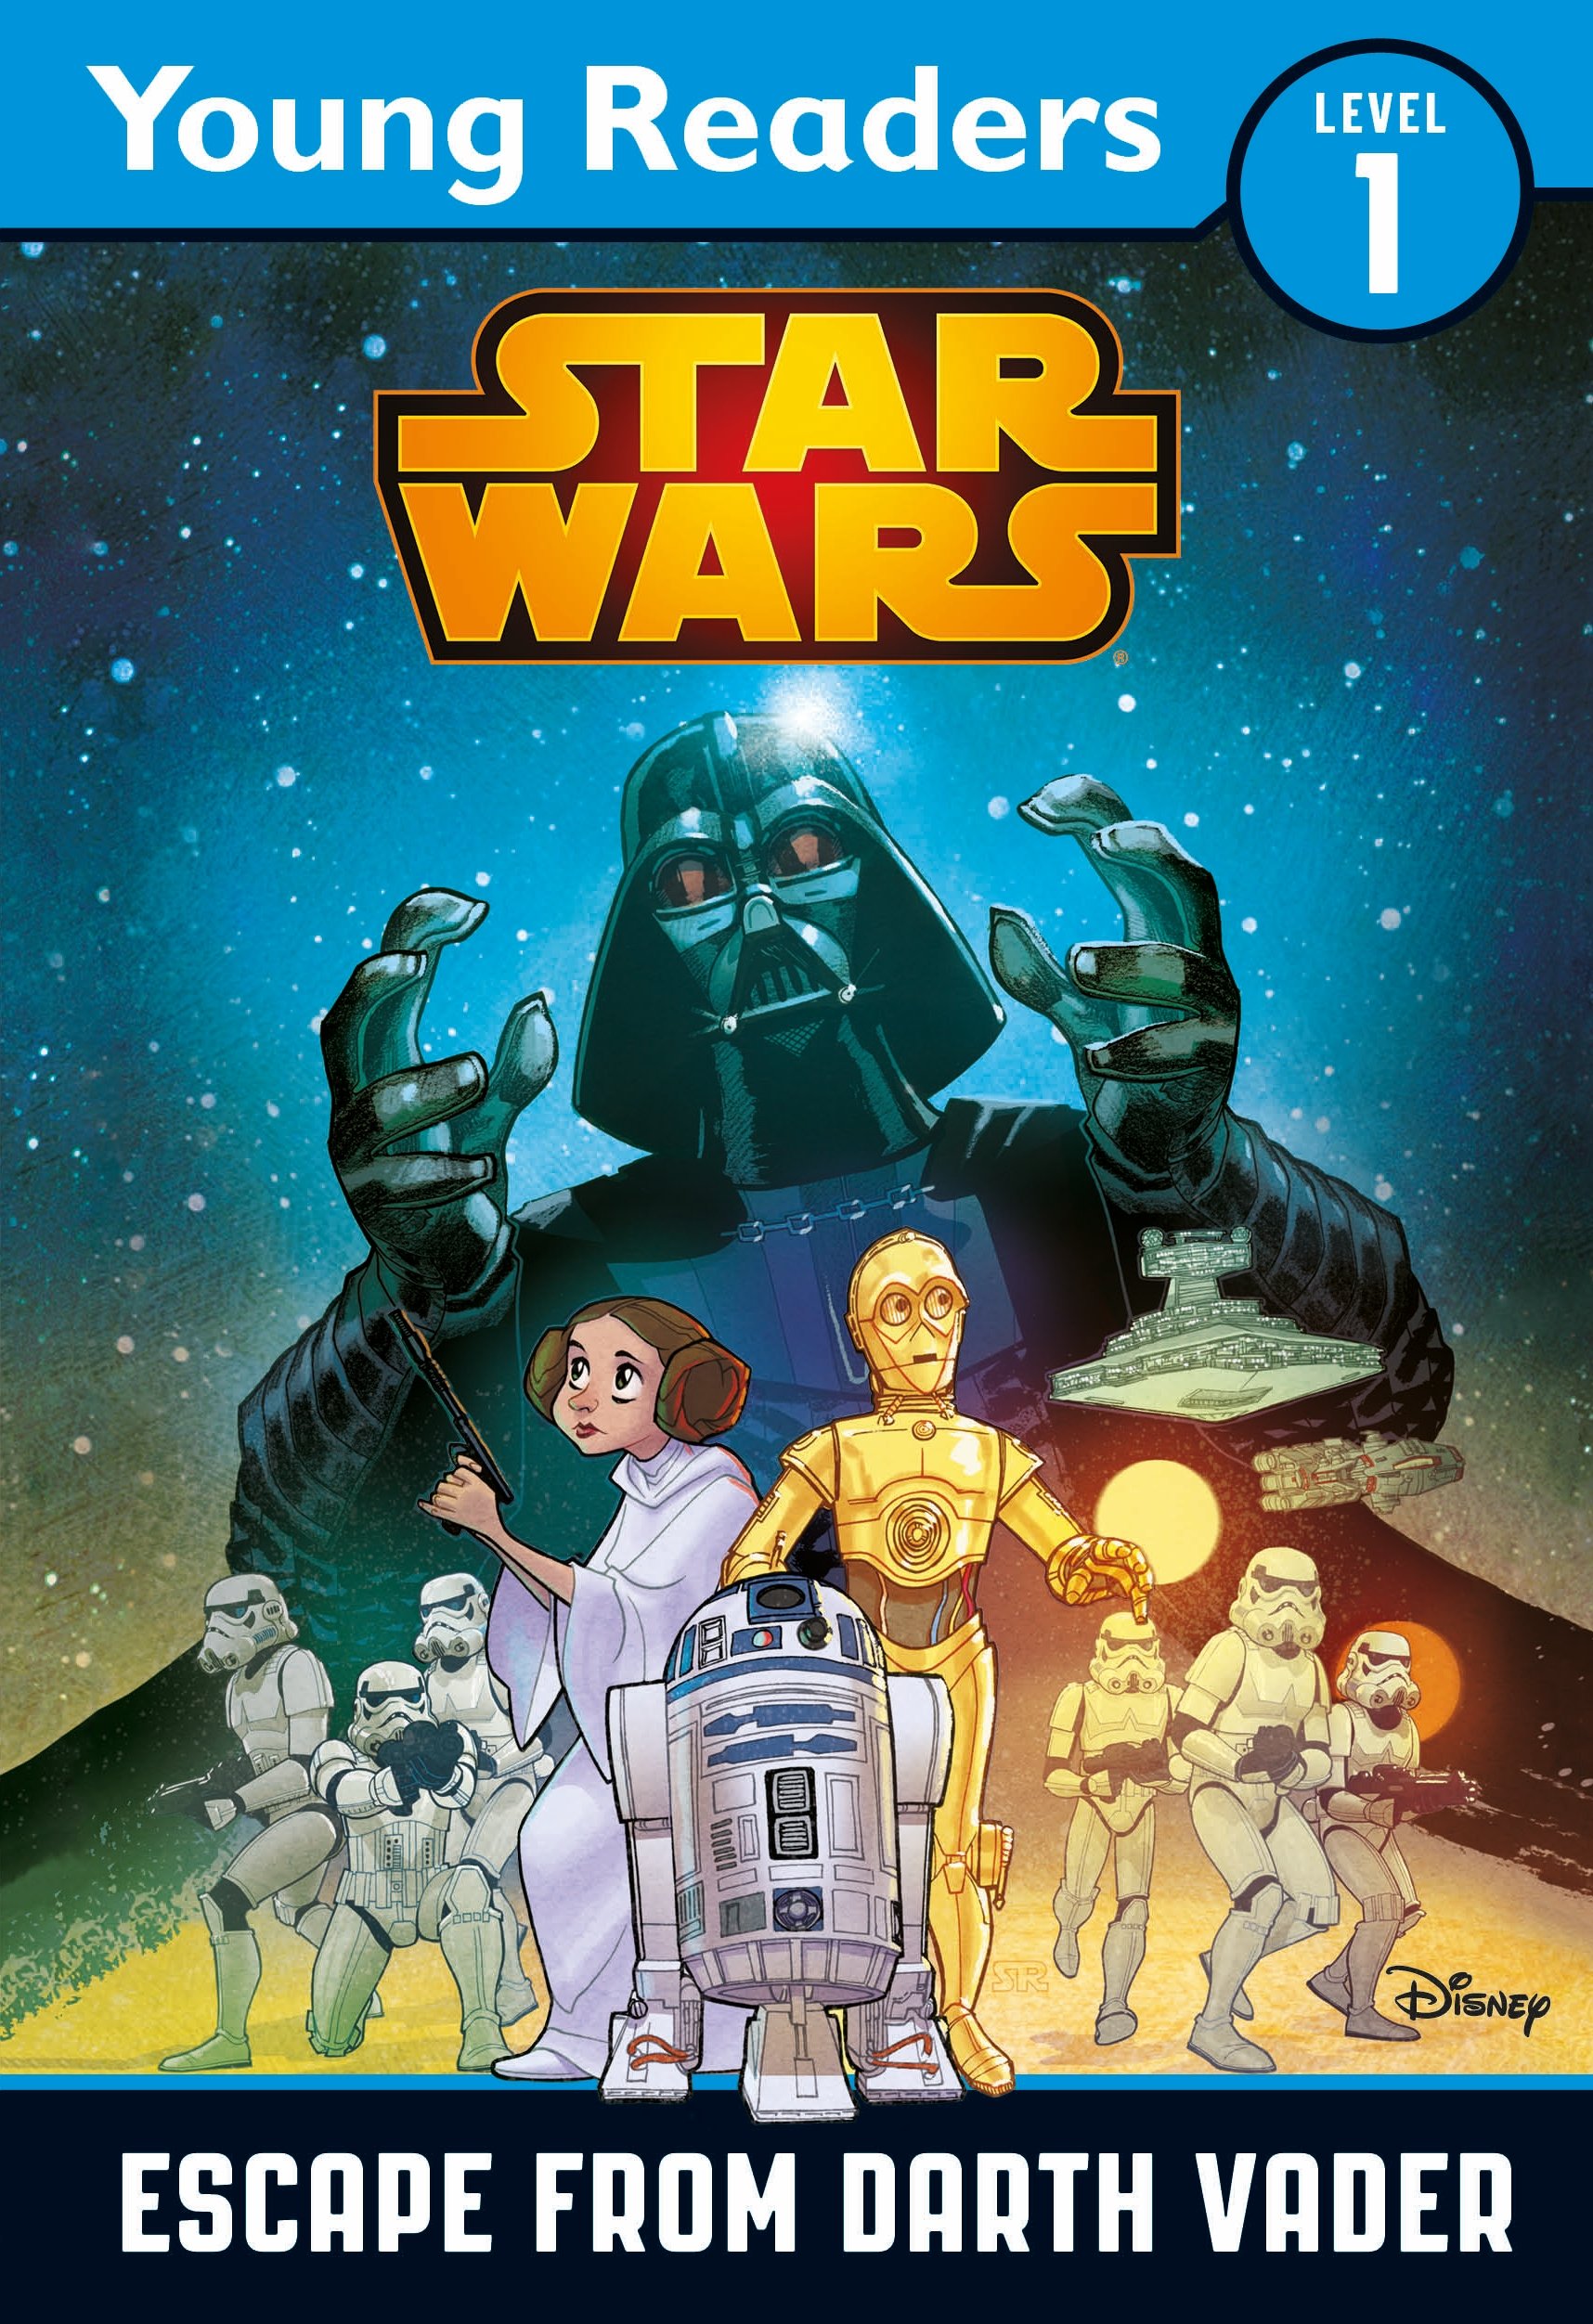 Escape from Darth Vader: A Star Wars Saga (Young Readers) Level 1 